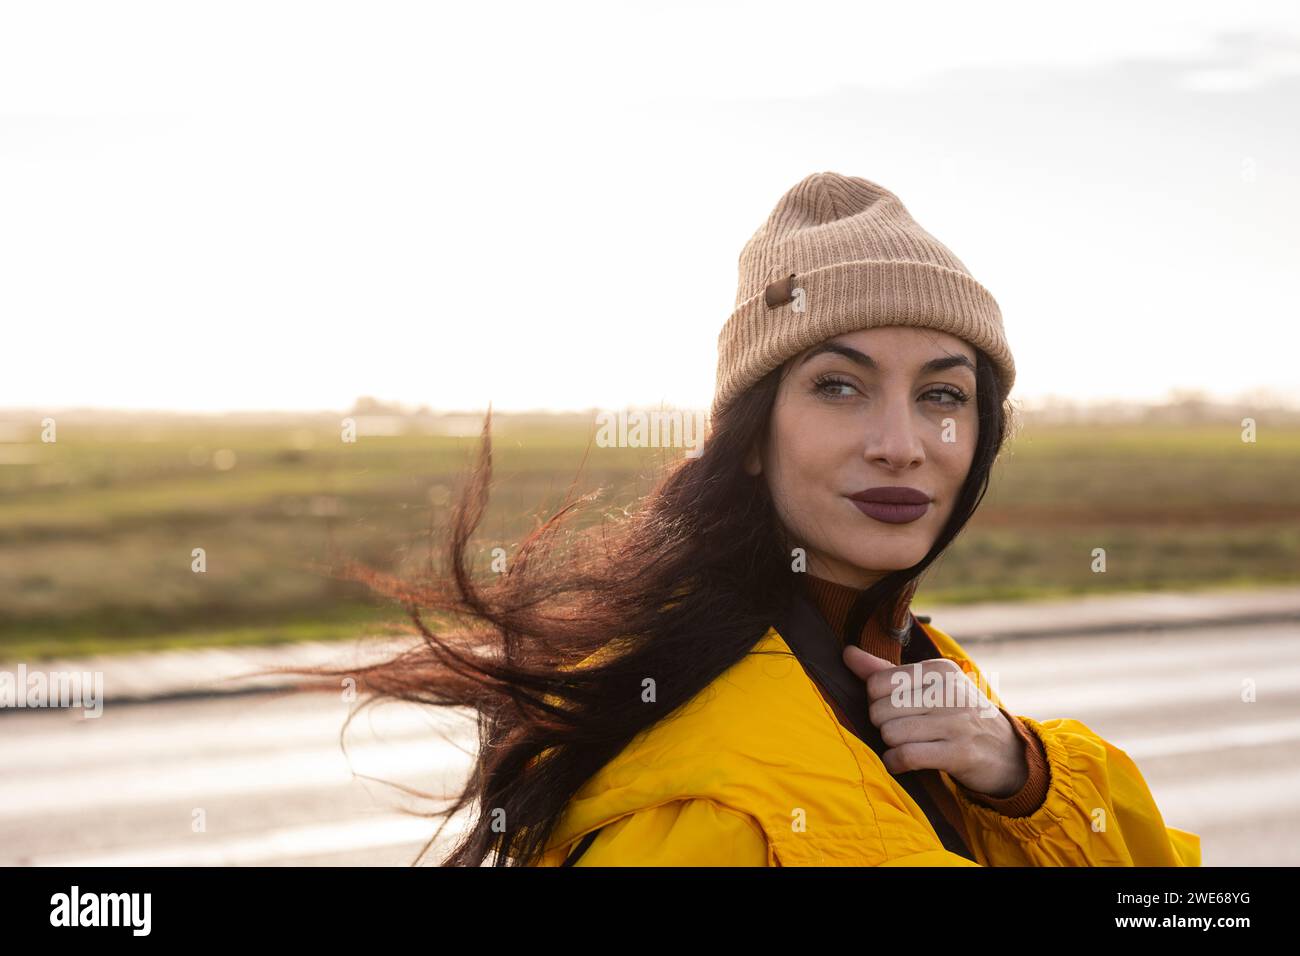 Beautiful woman with knit hat in front of sky Stock Photo